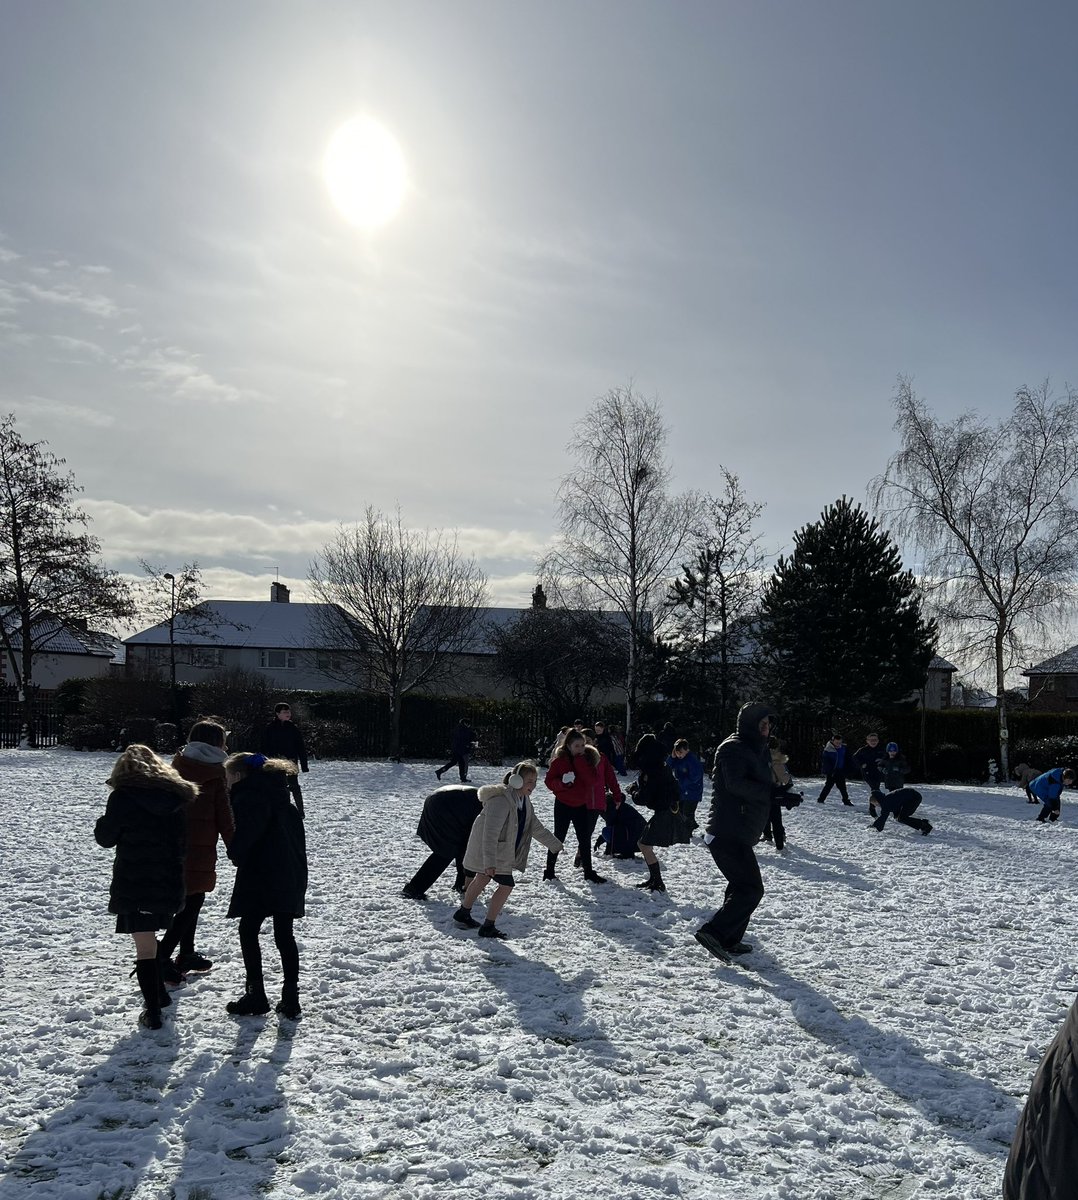 ❄️😊Our Children had the best start to the day… extra playtime in the snow! ⛄️🤣 #flomellyenrichment #flomellymentalhealth